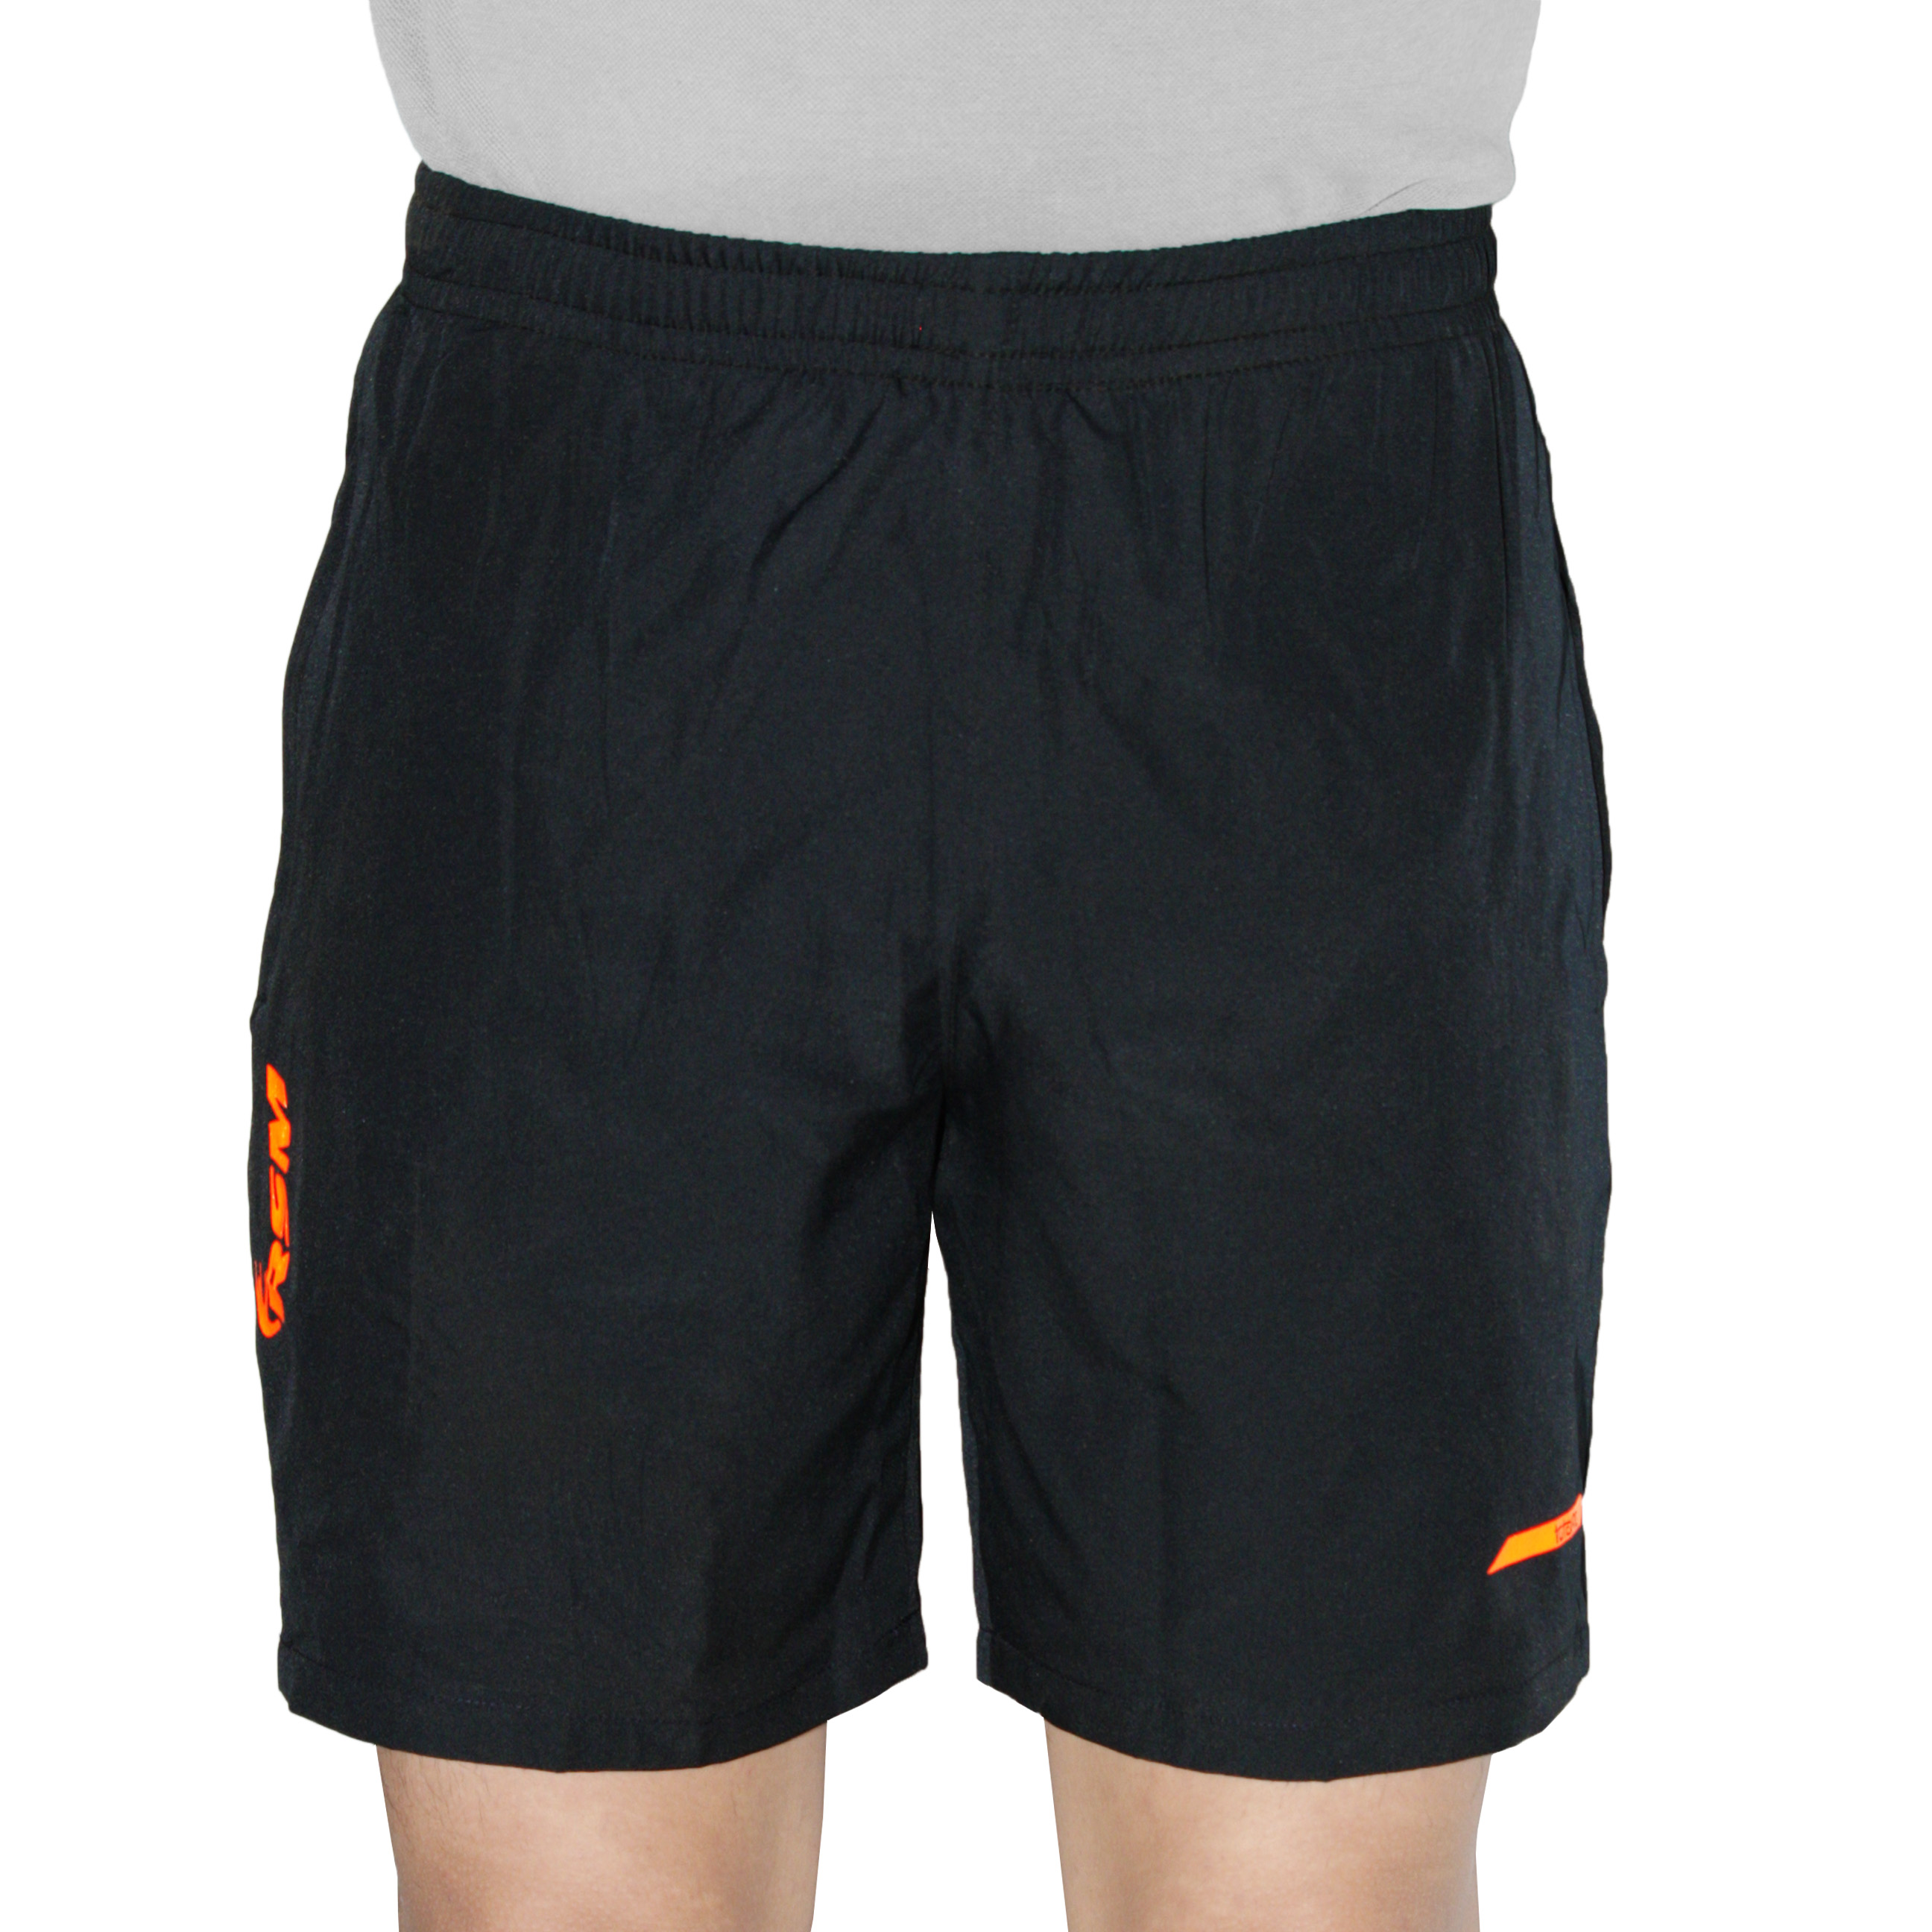 Buy Rsm Sports Shorts Online @ ₹390 from ShopClues